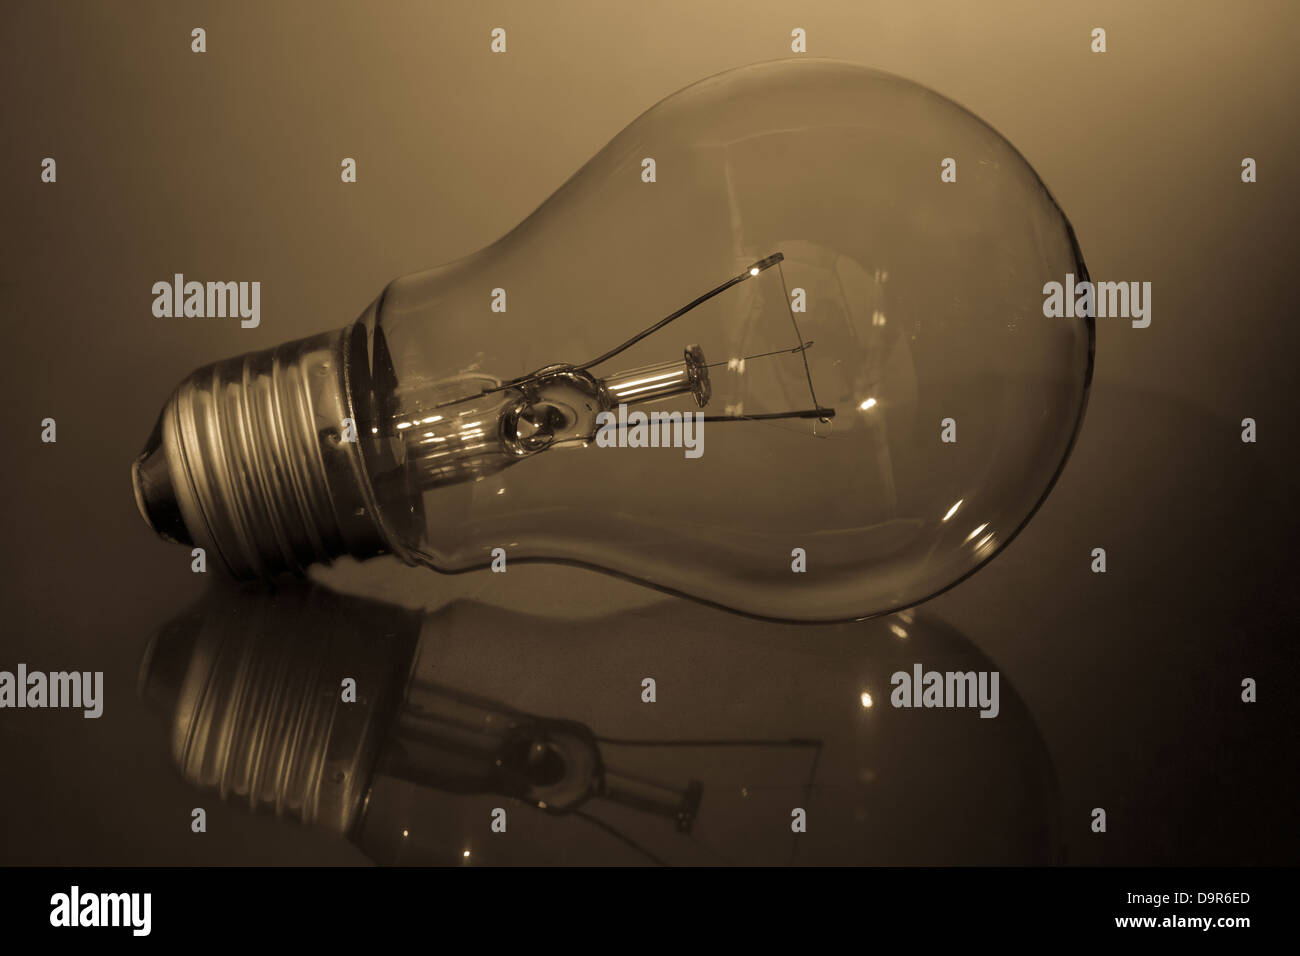 Clear light bulb laying on its side on reflective surface Stock Photo